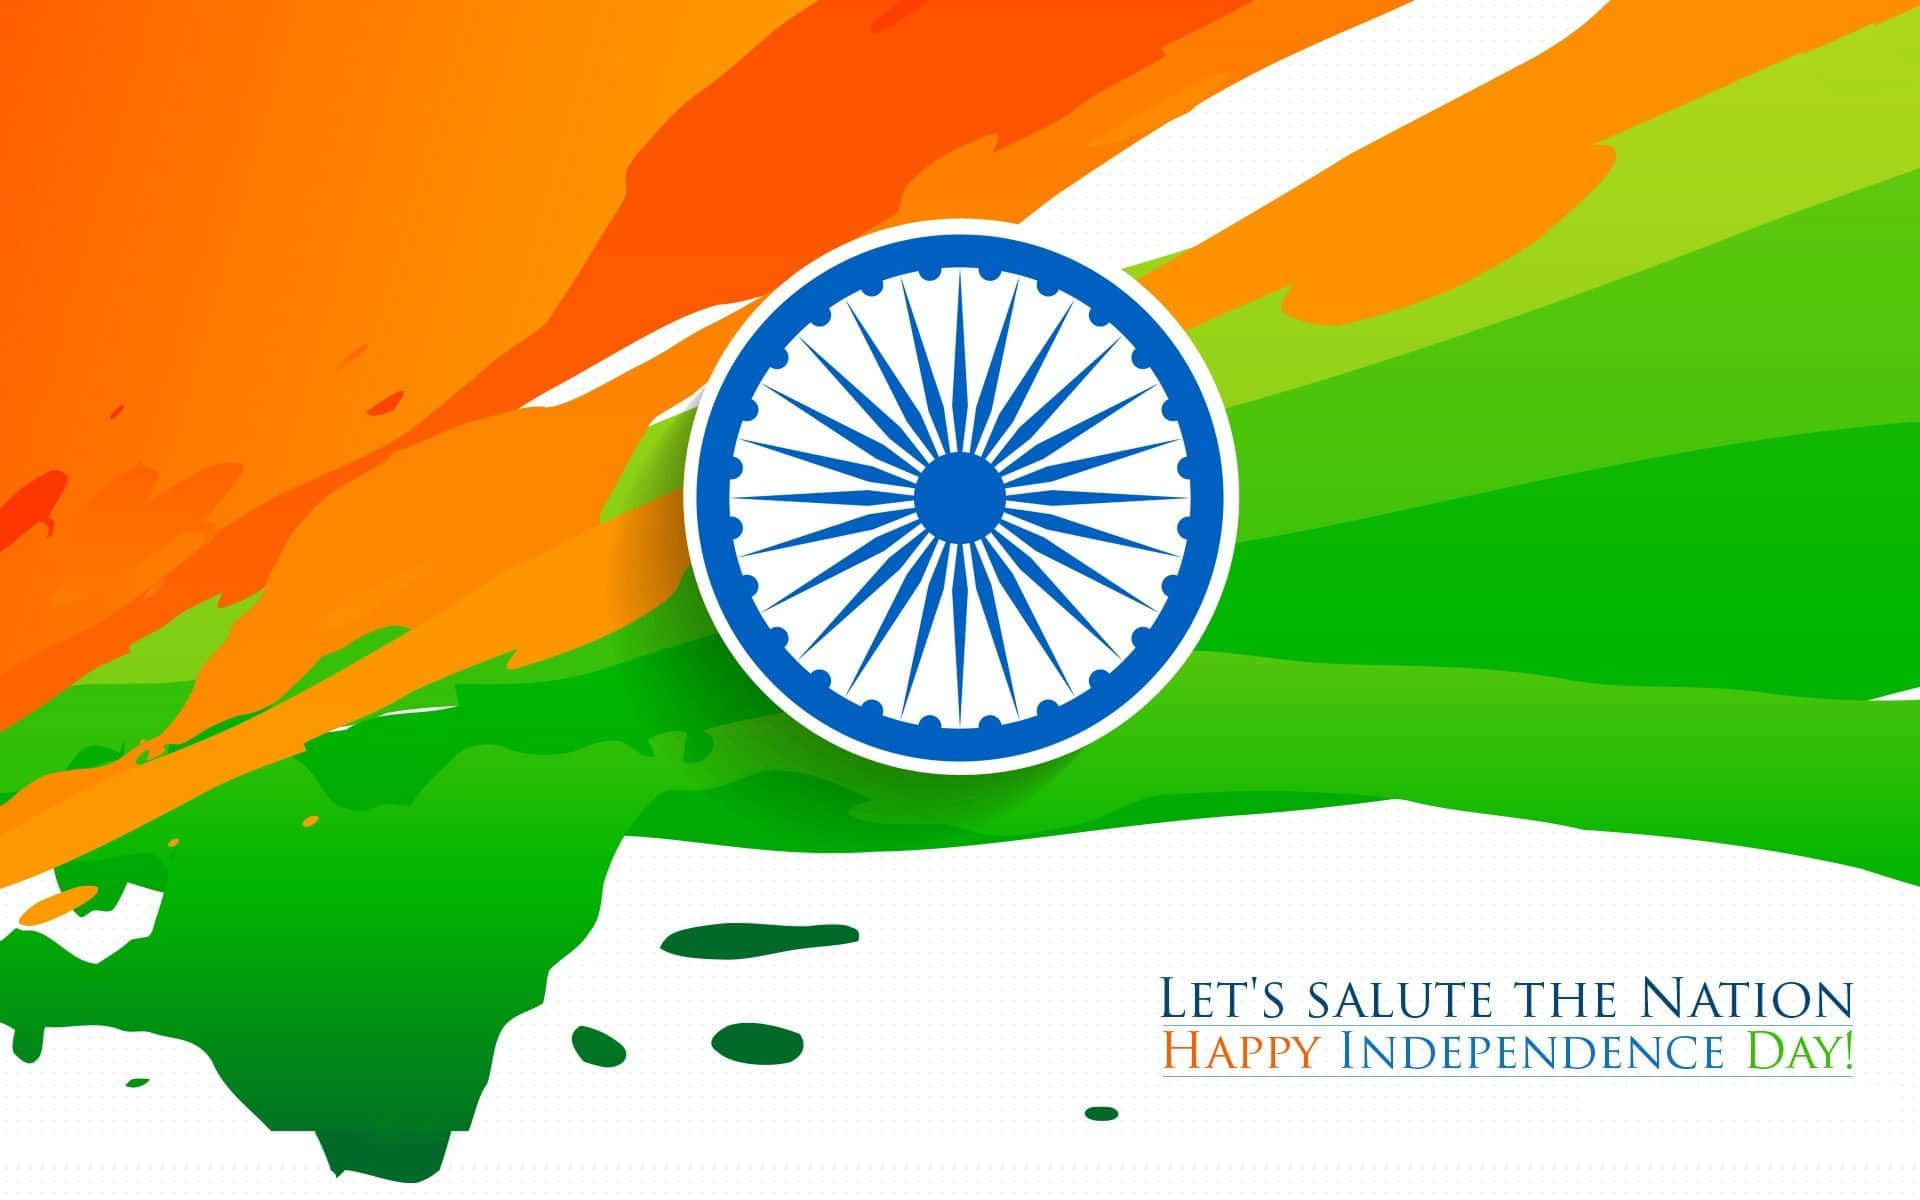 Celebrate Independence Day with Pride!